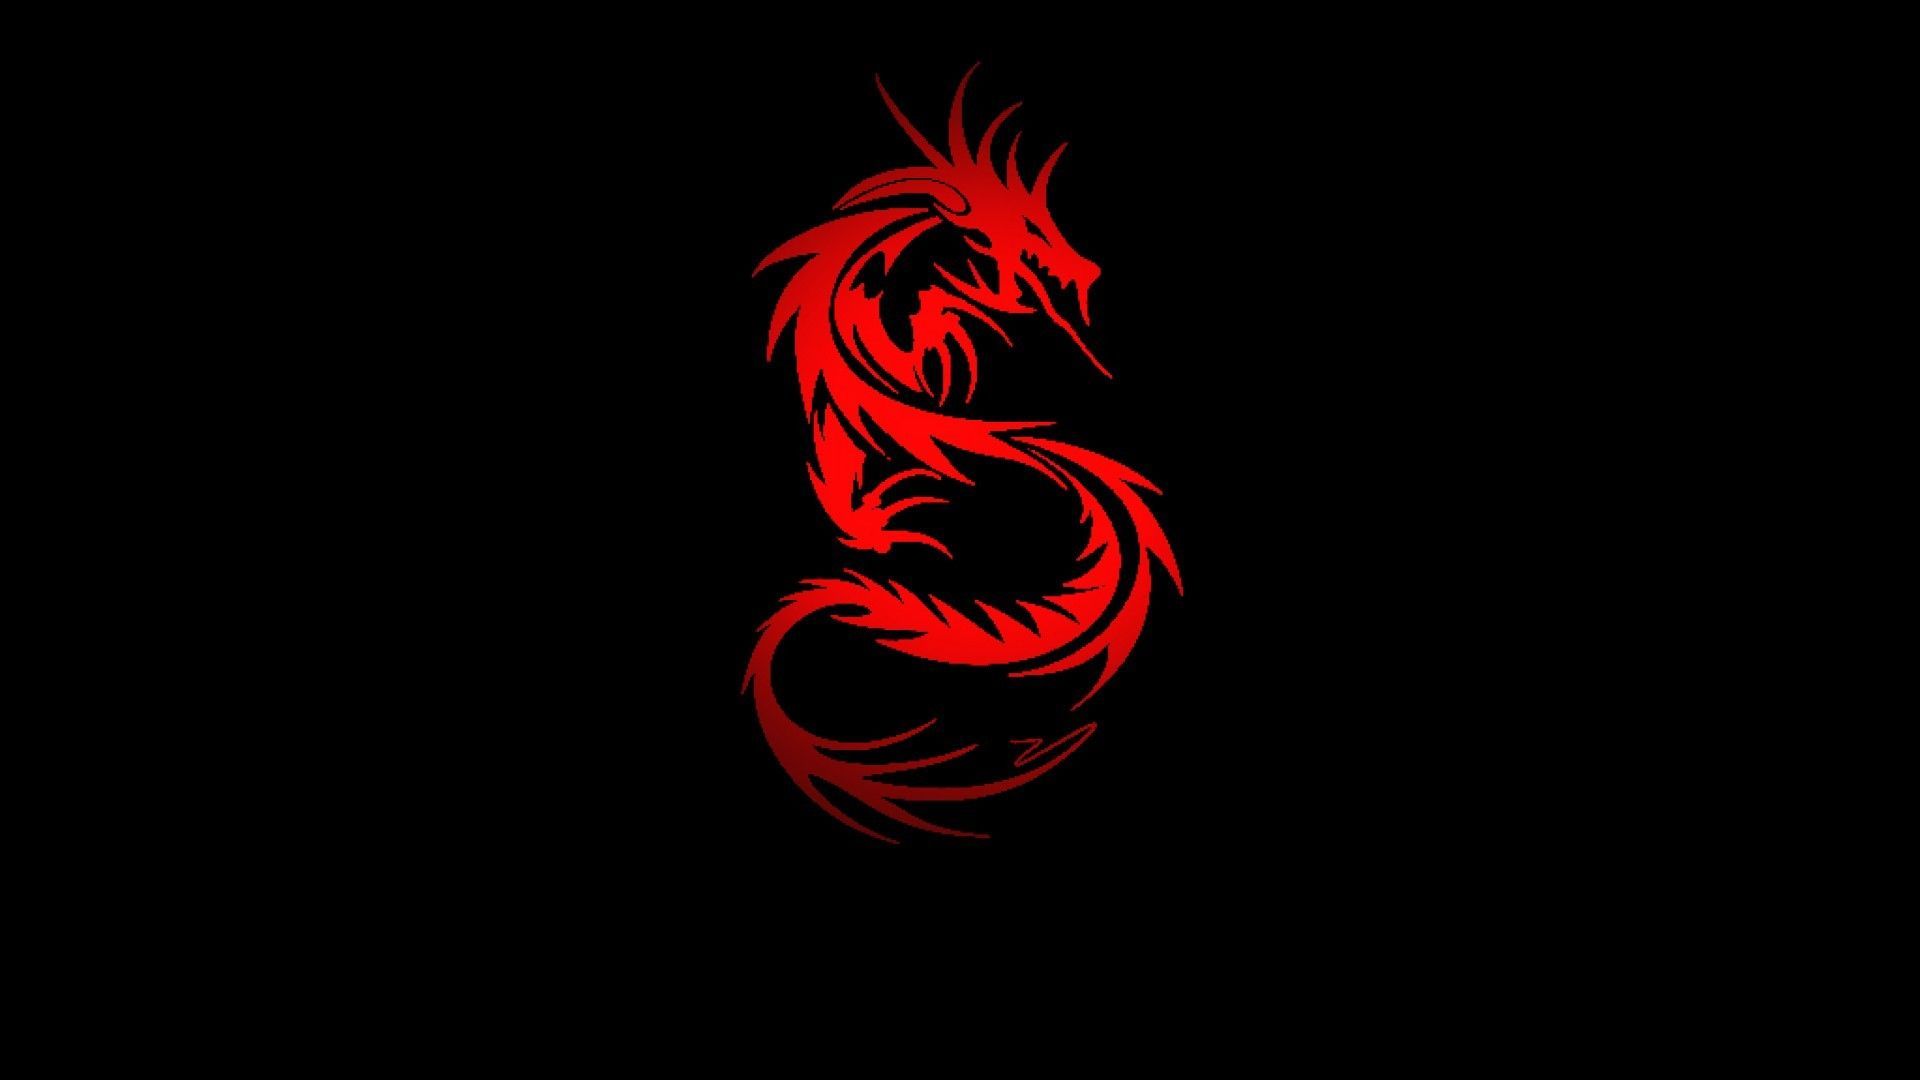 Red dragon on a black background - Dragon